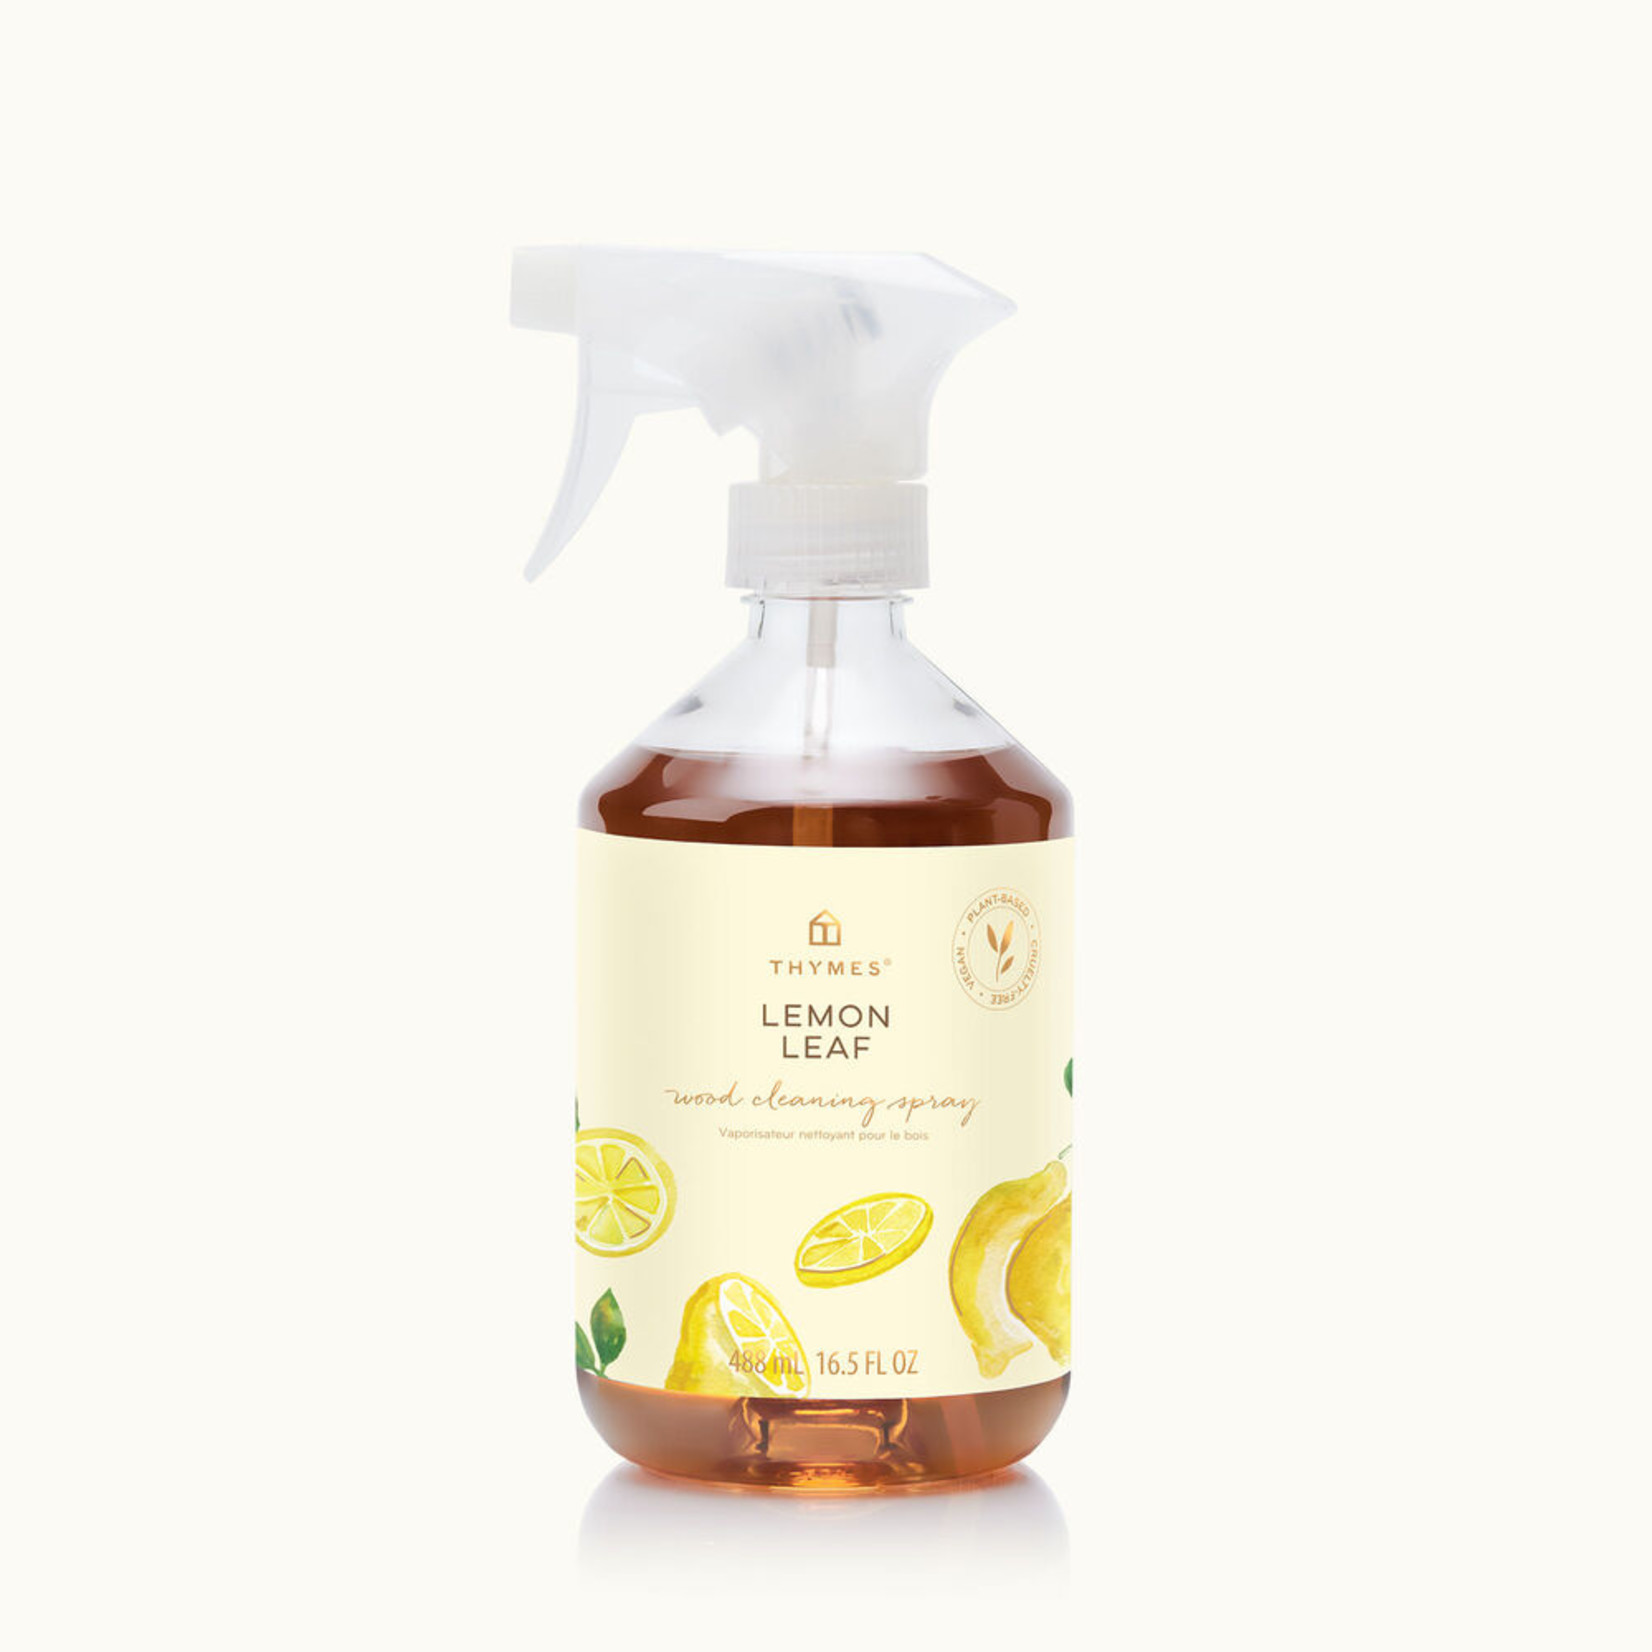 Thymes Thymes Wood Cleaning Spray